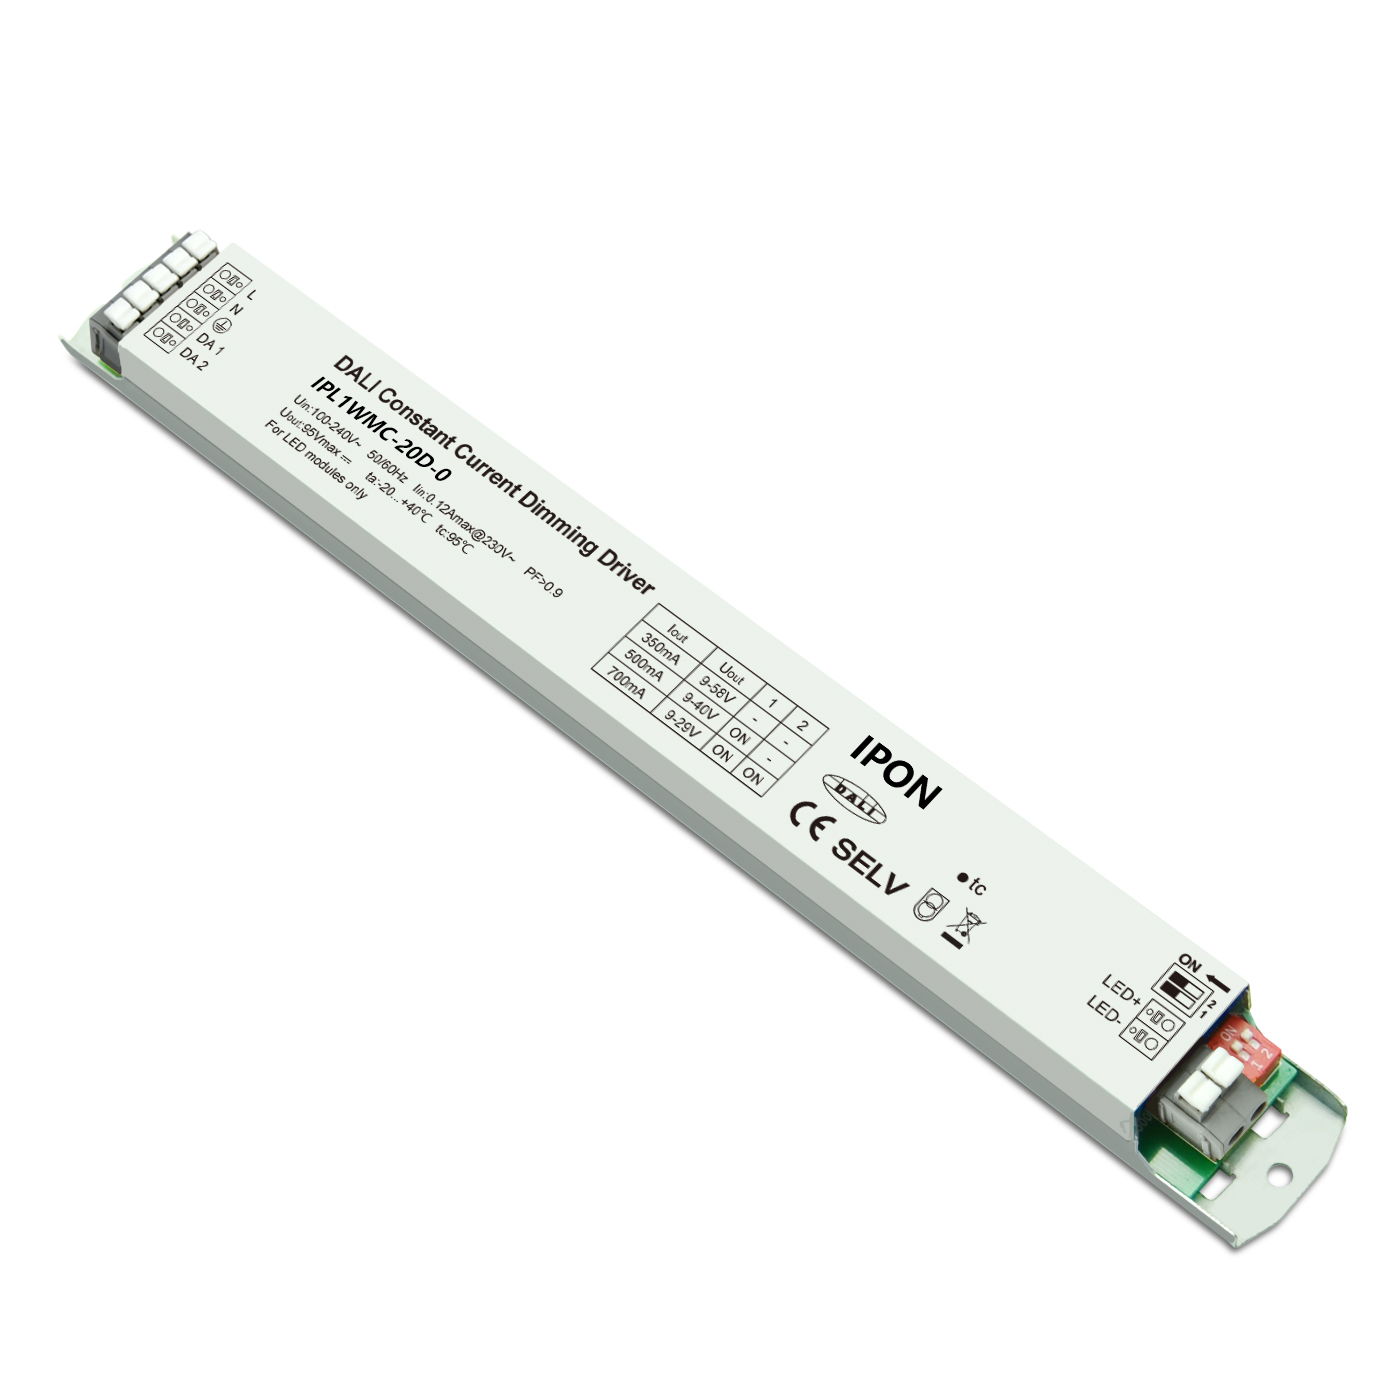 news-DALI driver led in China for Lighting control system-IPON LED-img